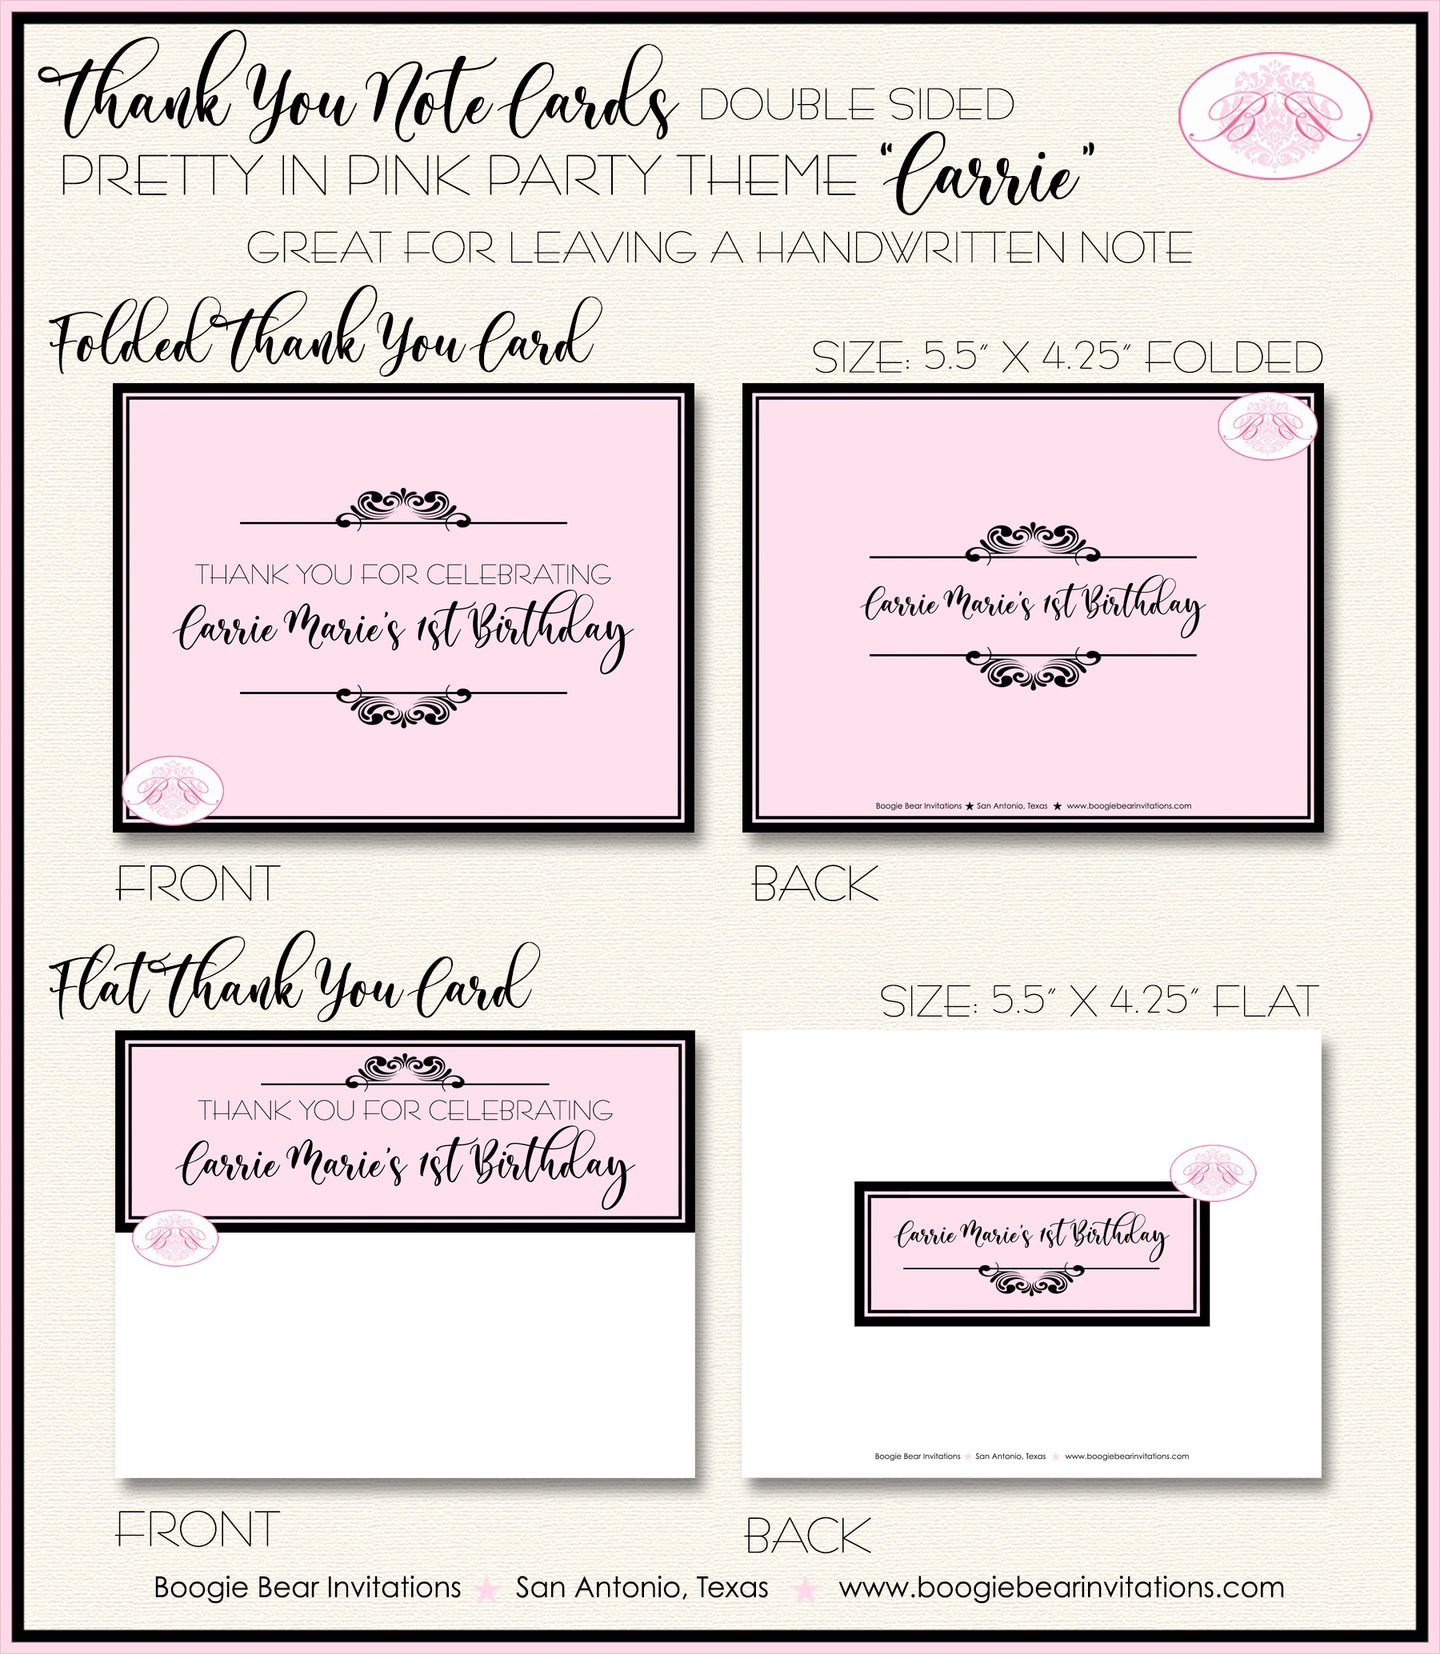 Pretty In Pink Birthday Party Thank You Card Girl Princess Boogie Bear Invitations Carrie Theme Printed